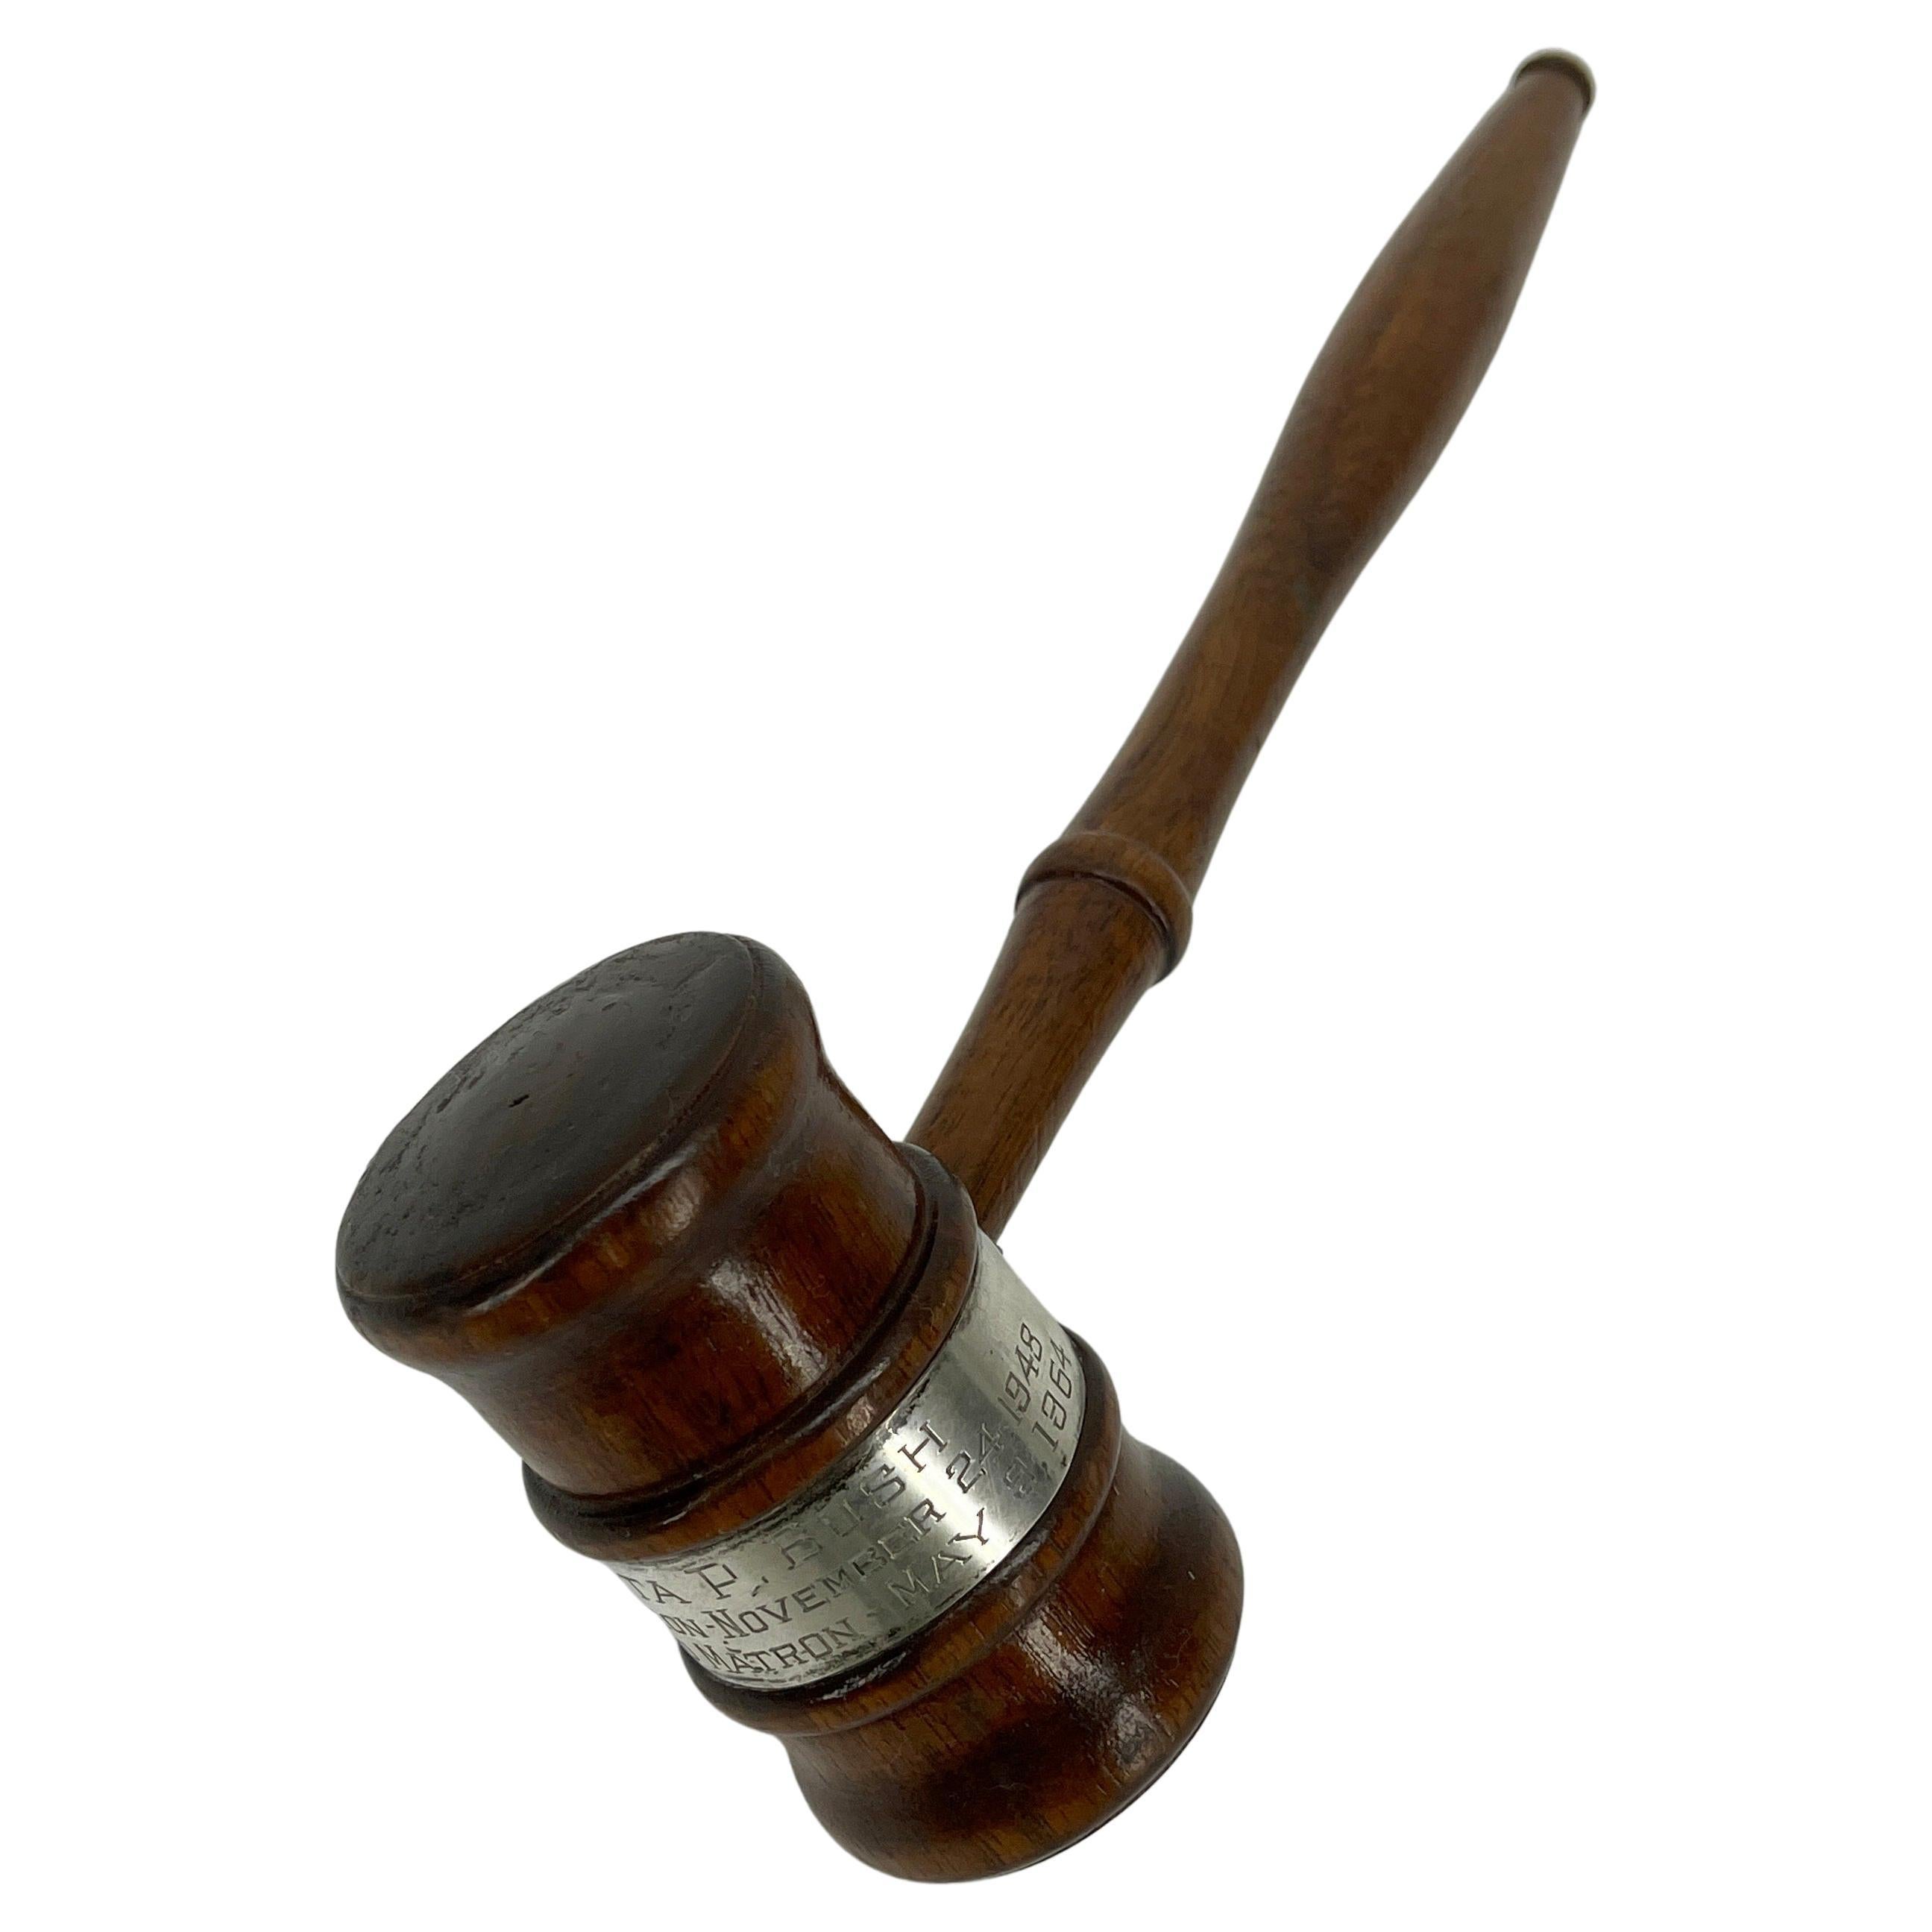 Antique Silver and Wooden Presentation Judge's Gavel, circa 1960s